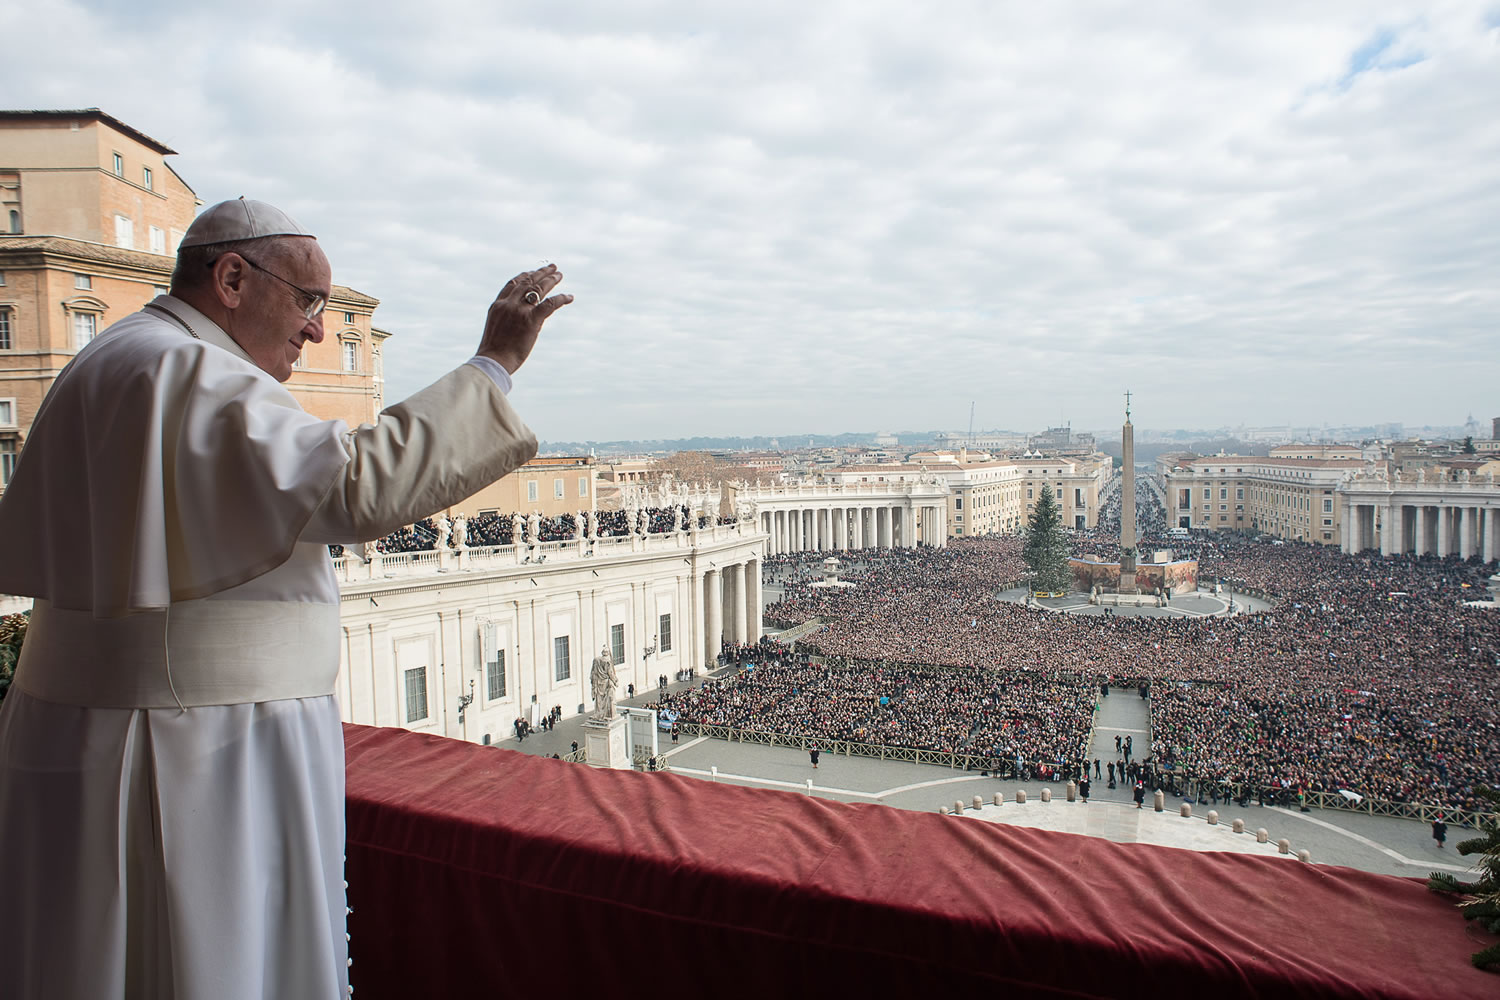 Pope Francis delivers his &quot;Urbi et Orbi&quot; (to the city and to the world) blessing from the central balcony of St. Peter's Basilica on Thursday at the Vatican.